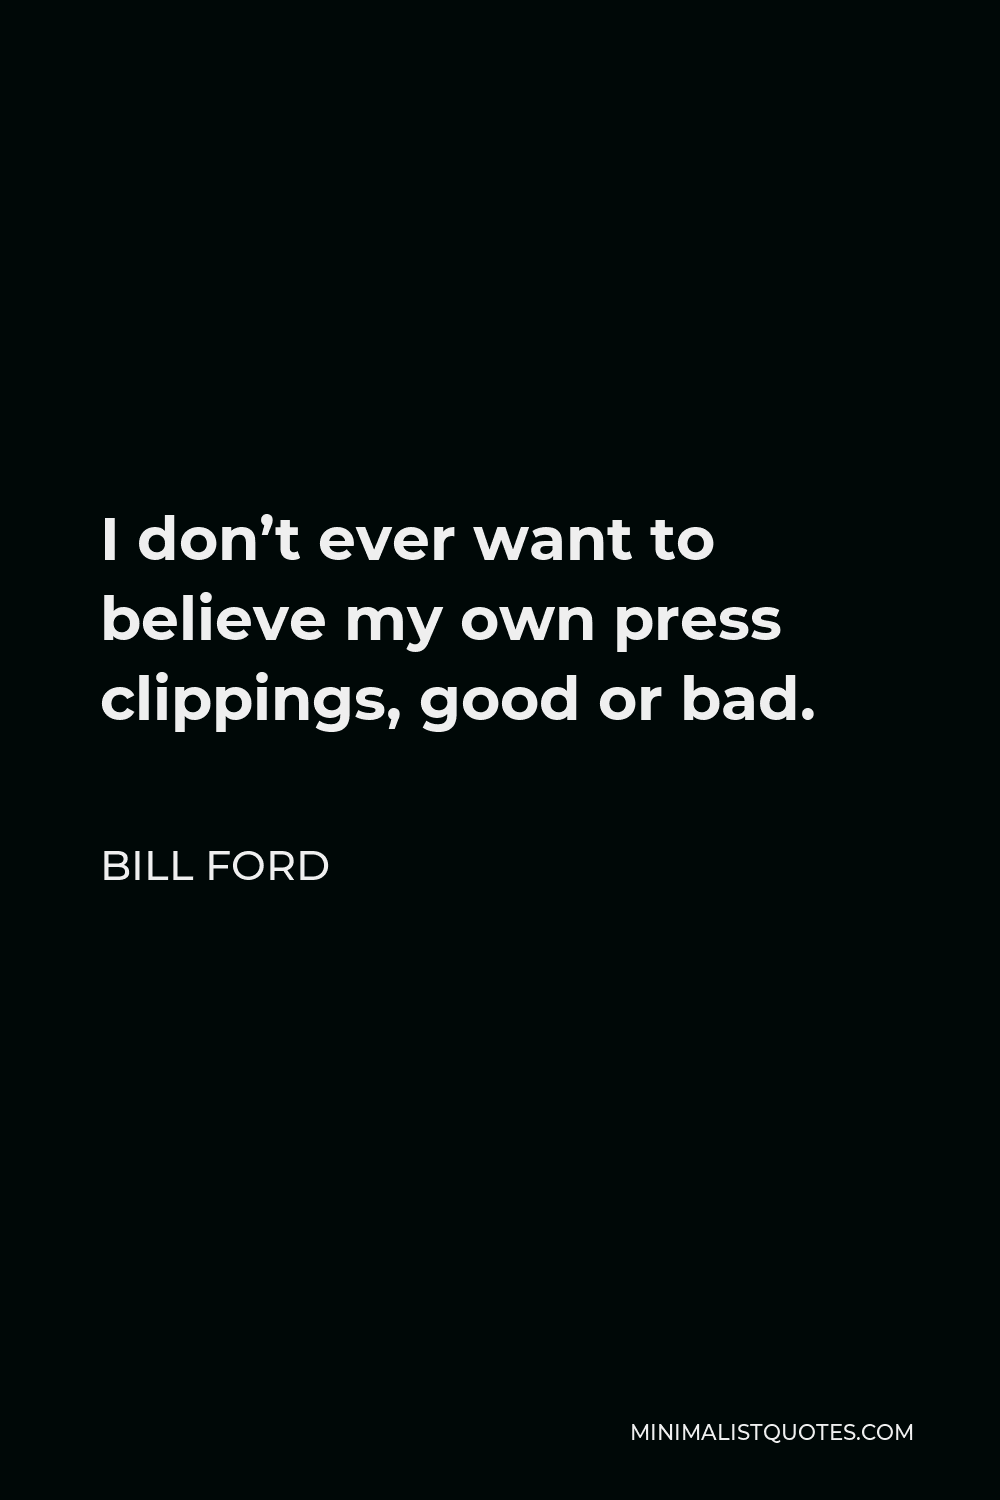 Bill Ford Quote - I don’t ever want to believe my own press clippings, good or bad.